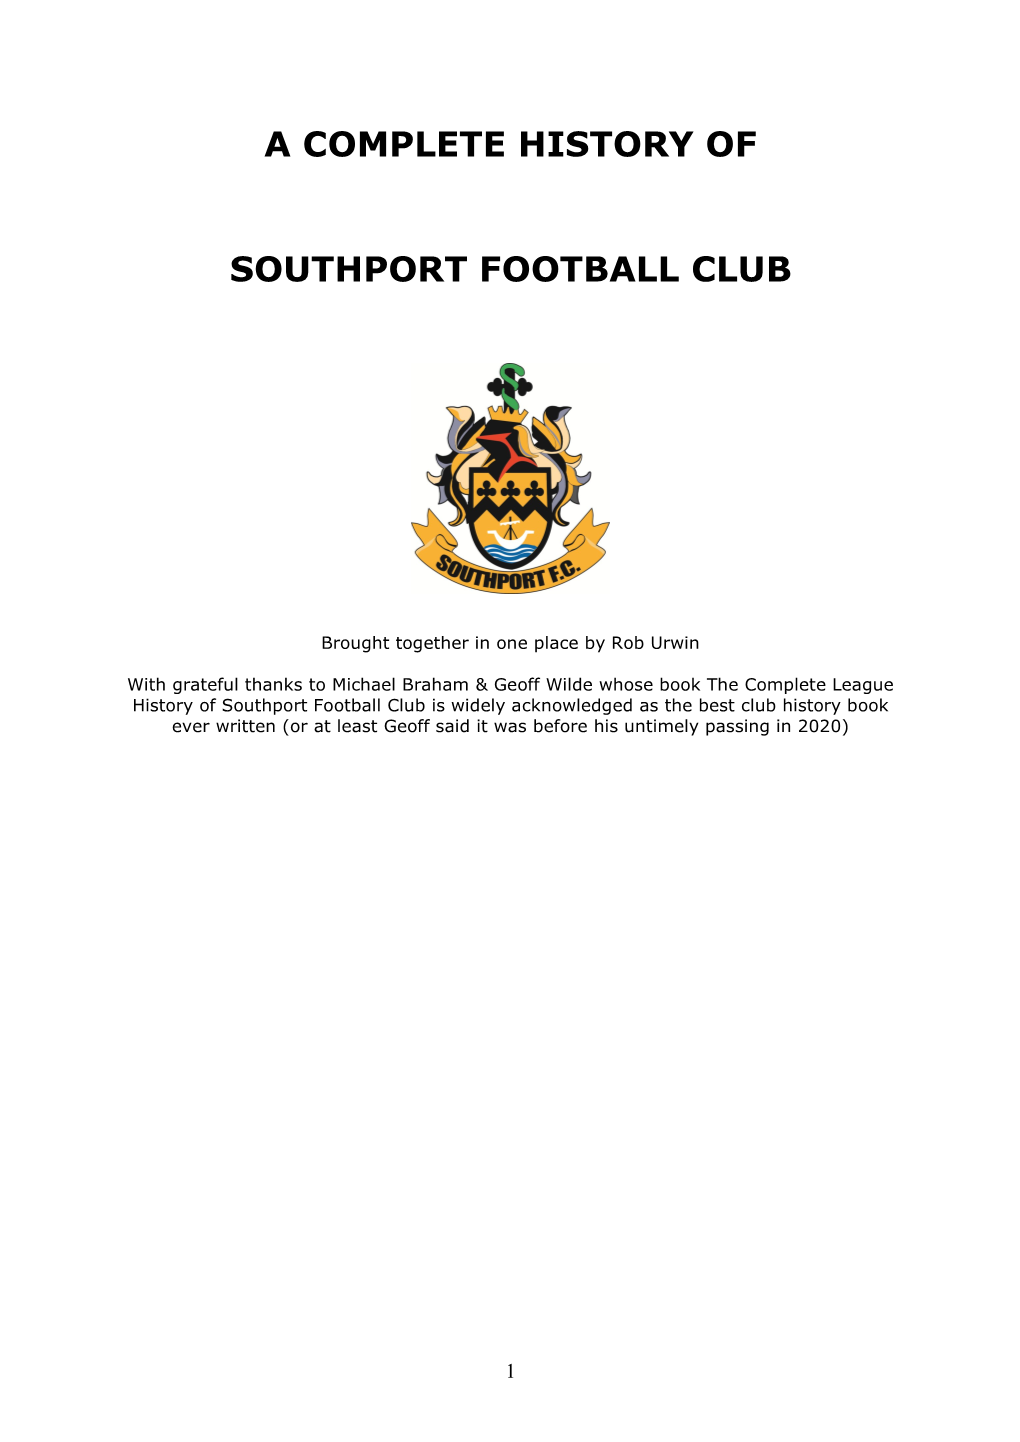 A Complete History of Southport